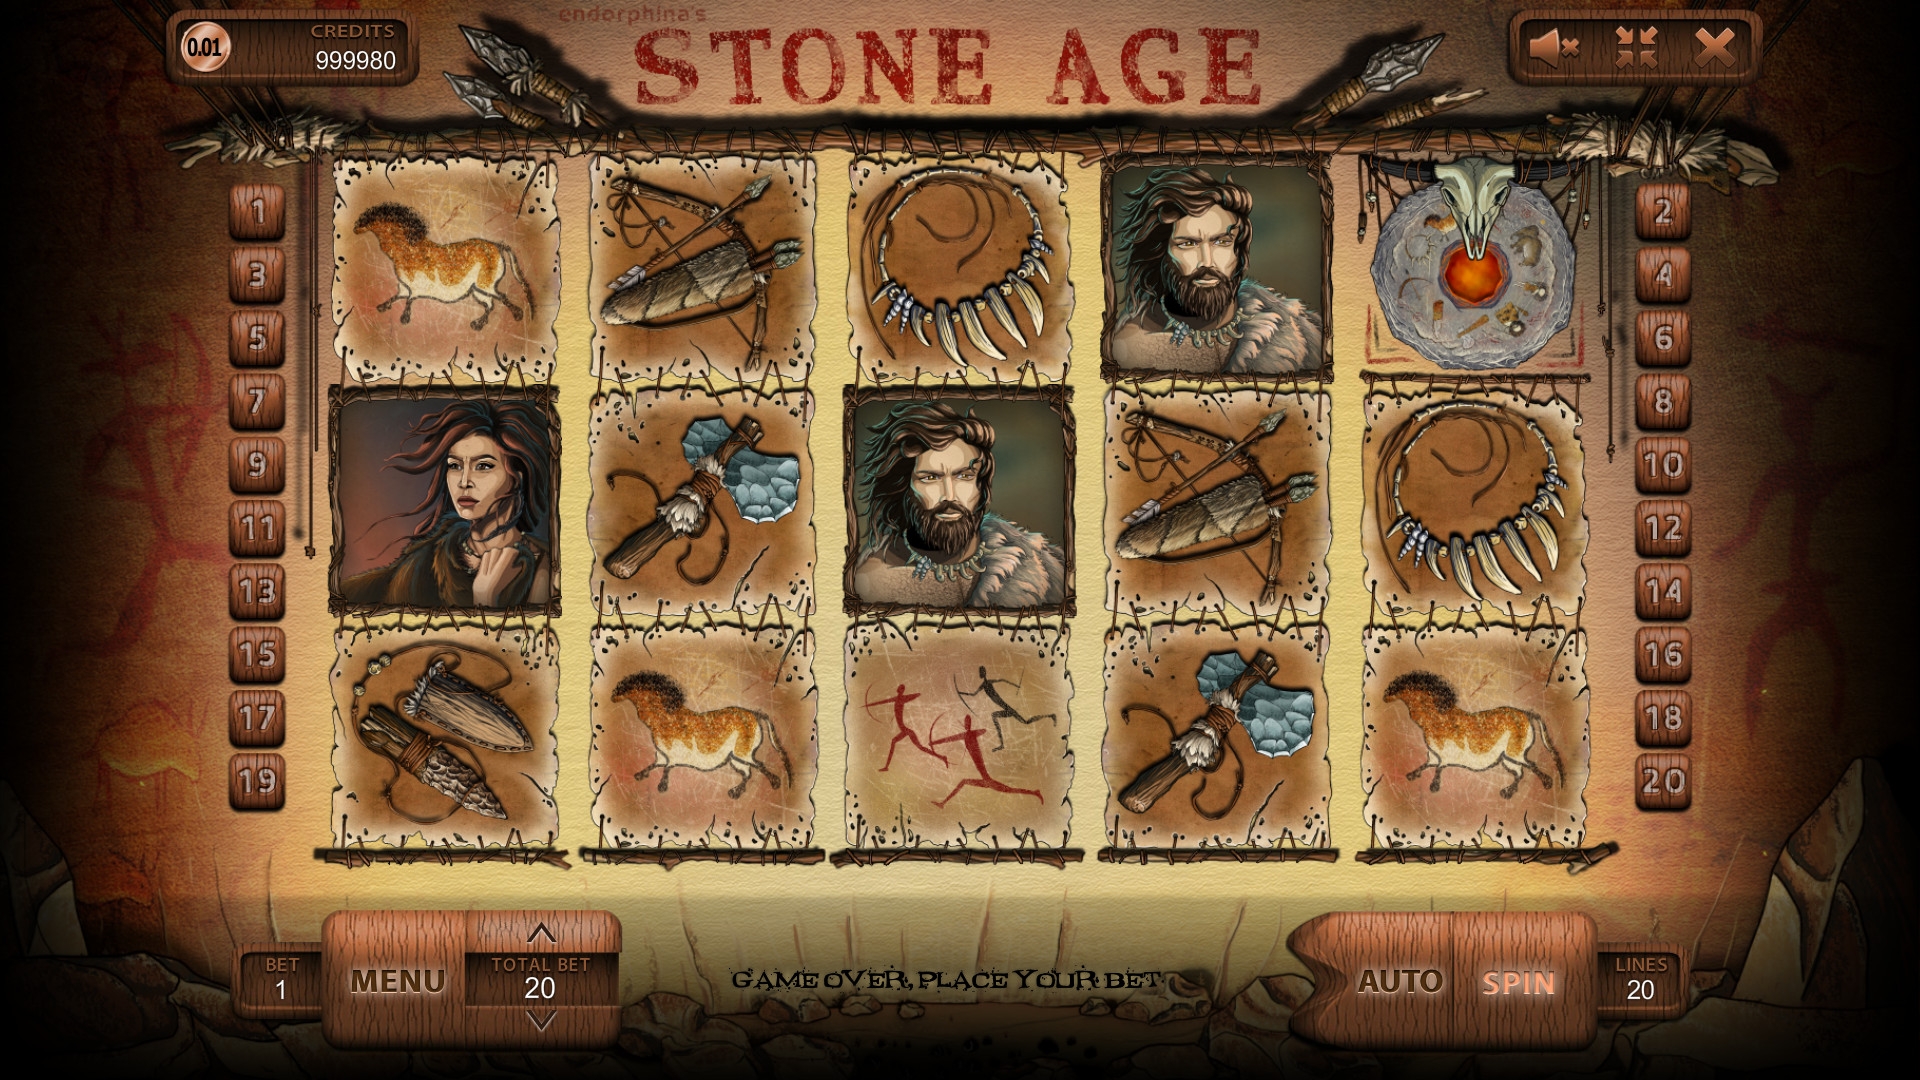 Stone Age (Stone Age) from category Slots